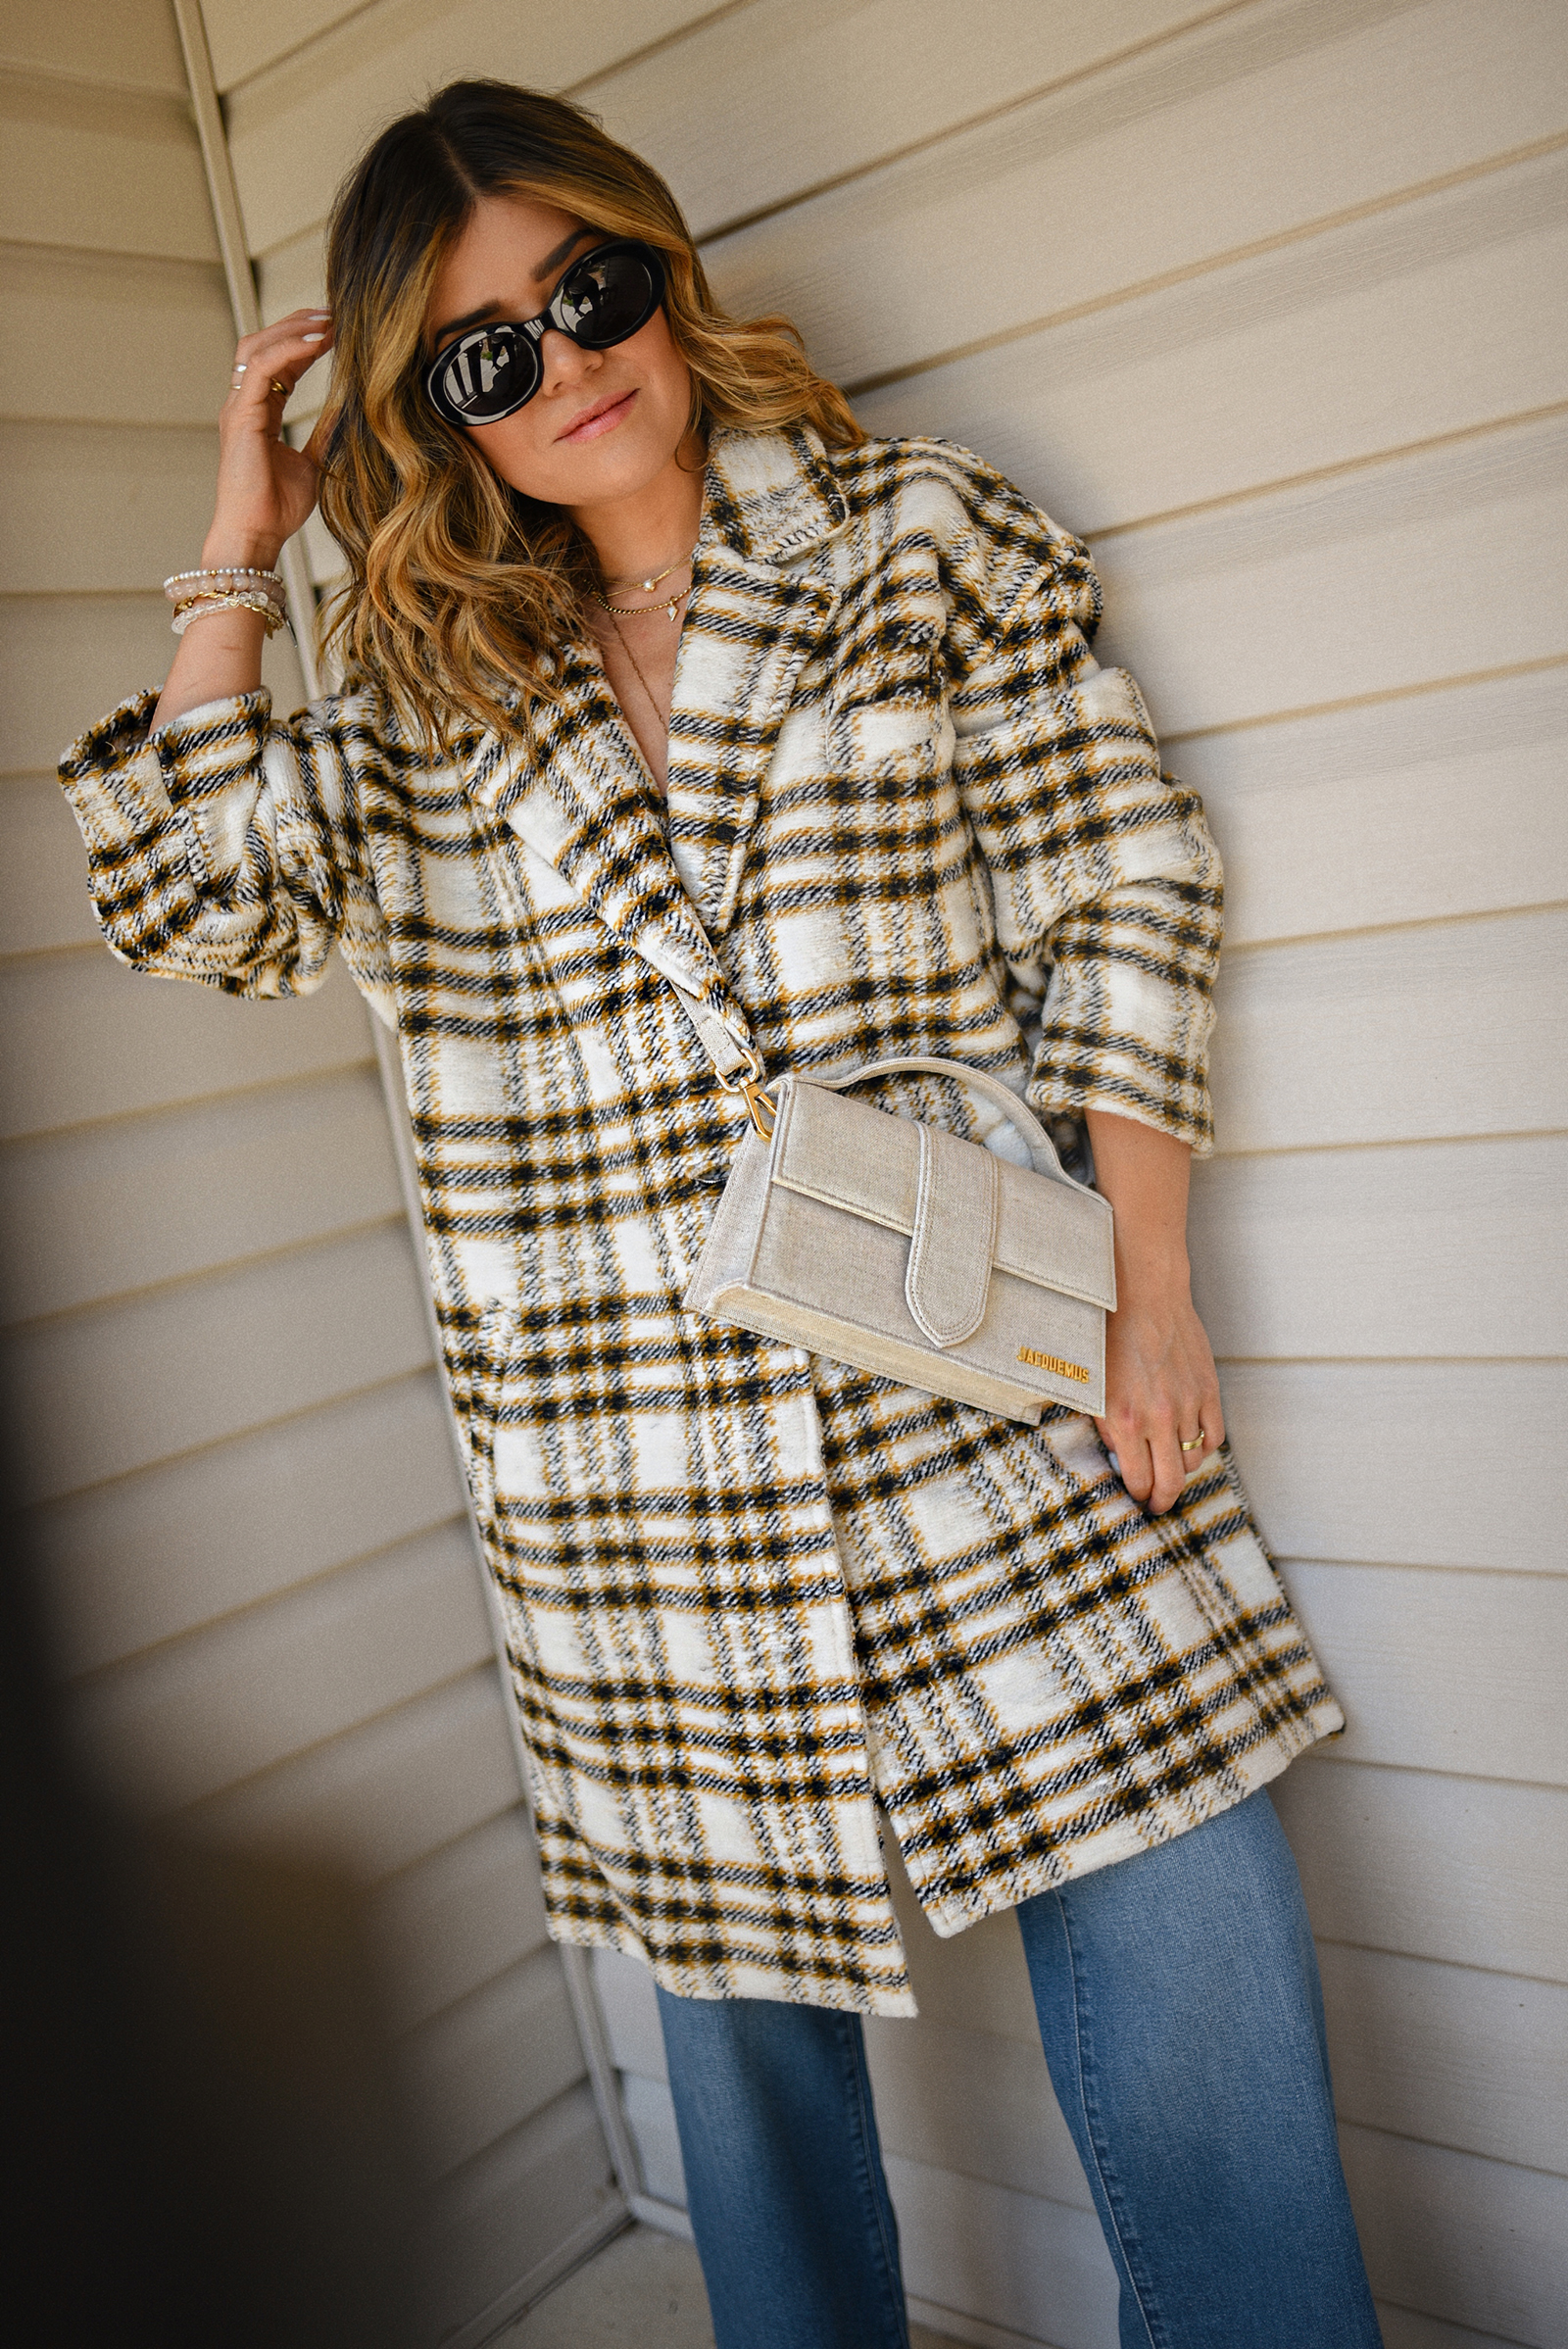 Carolina Hellal of Chic Talk wearing a Nordstrom plaid coat, Madewell wide leg jeans, Celine sunglasses, and Jacquemus Le grand Bambino Bag.